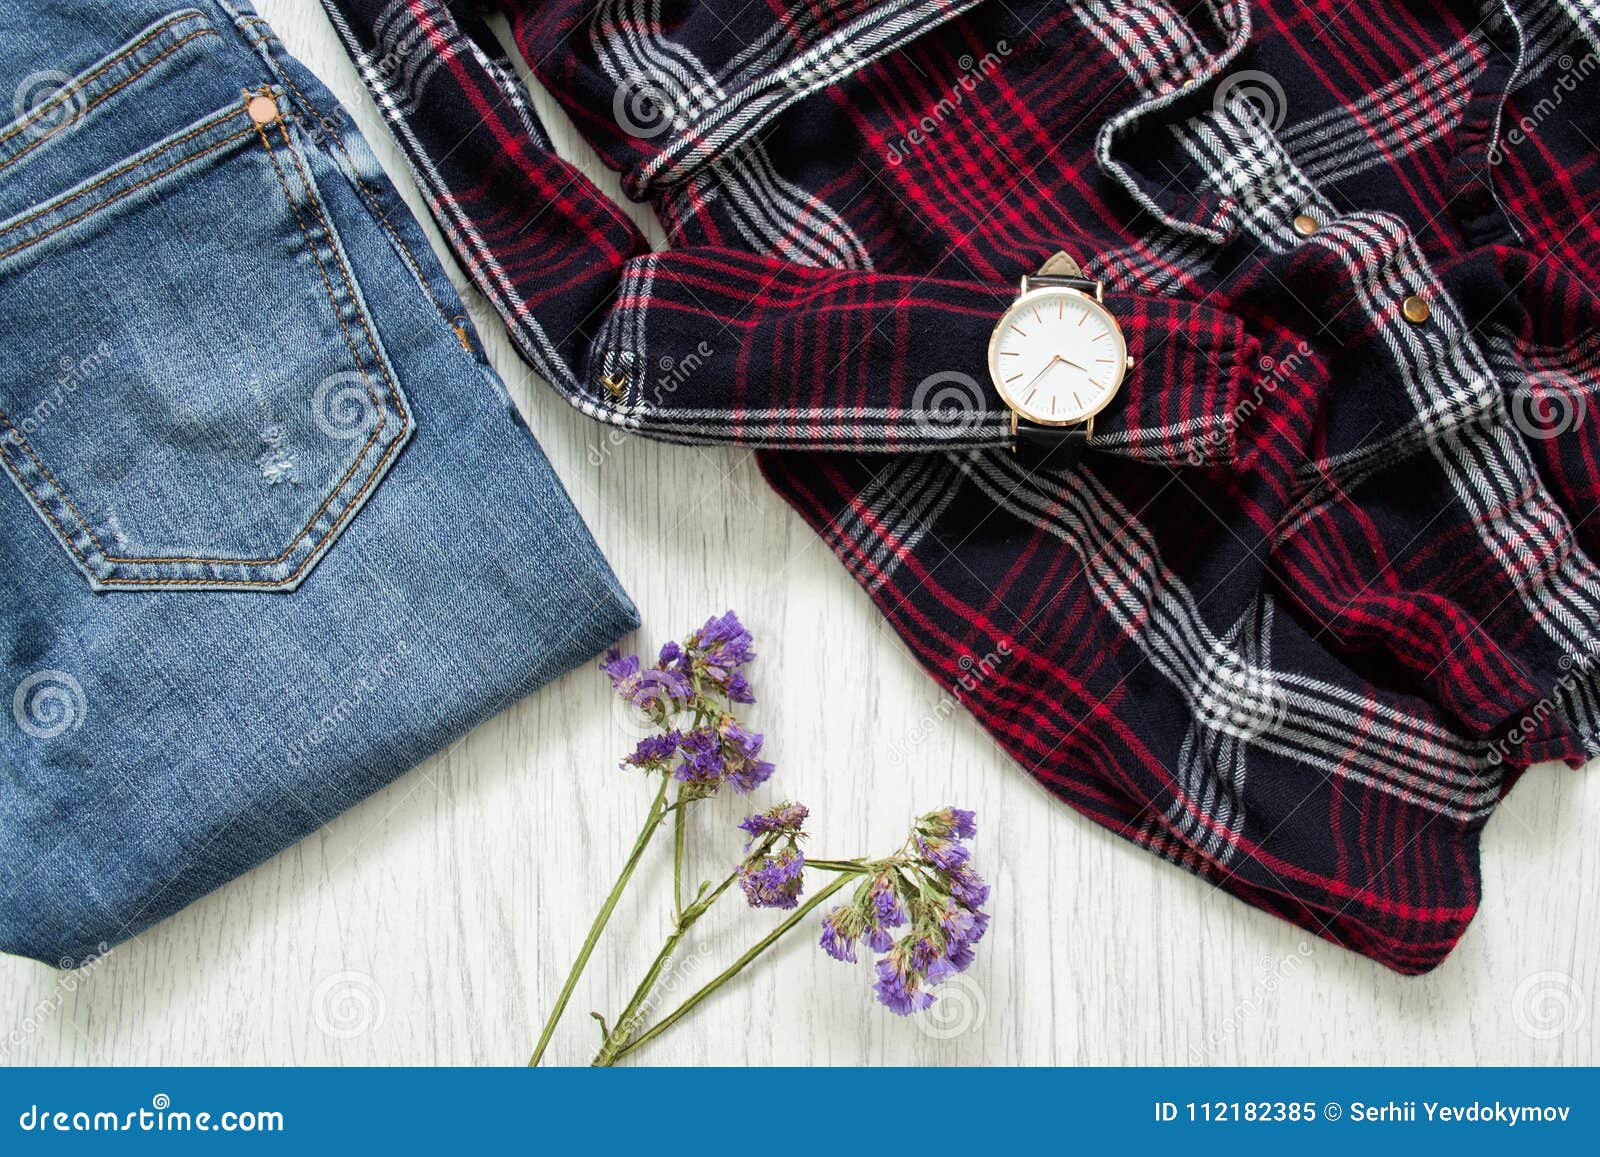 Part of Plaid Shirts, Watches, Jeans and Wildflowers. Fashionable ...